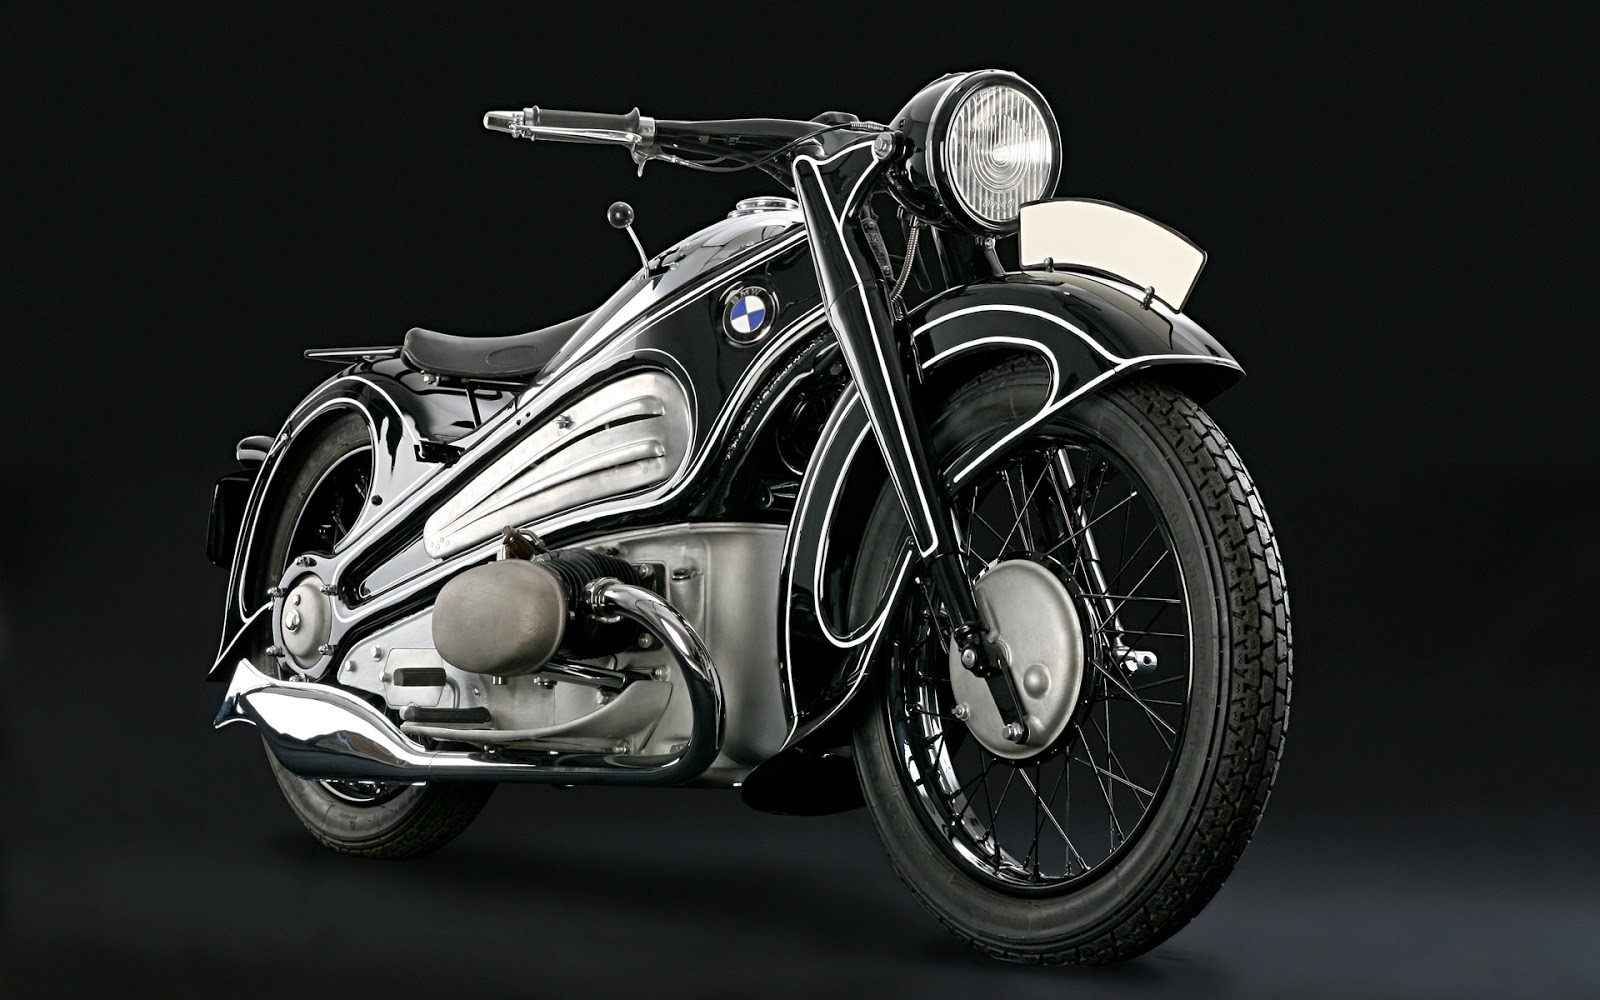 Cool Bike New HD Wallpaper 2014 All About HD Wallpapers